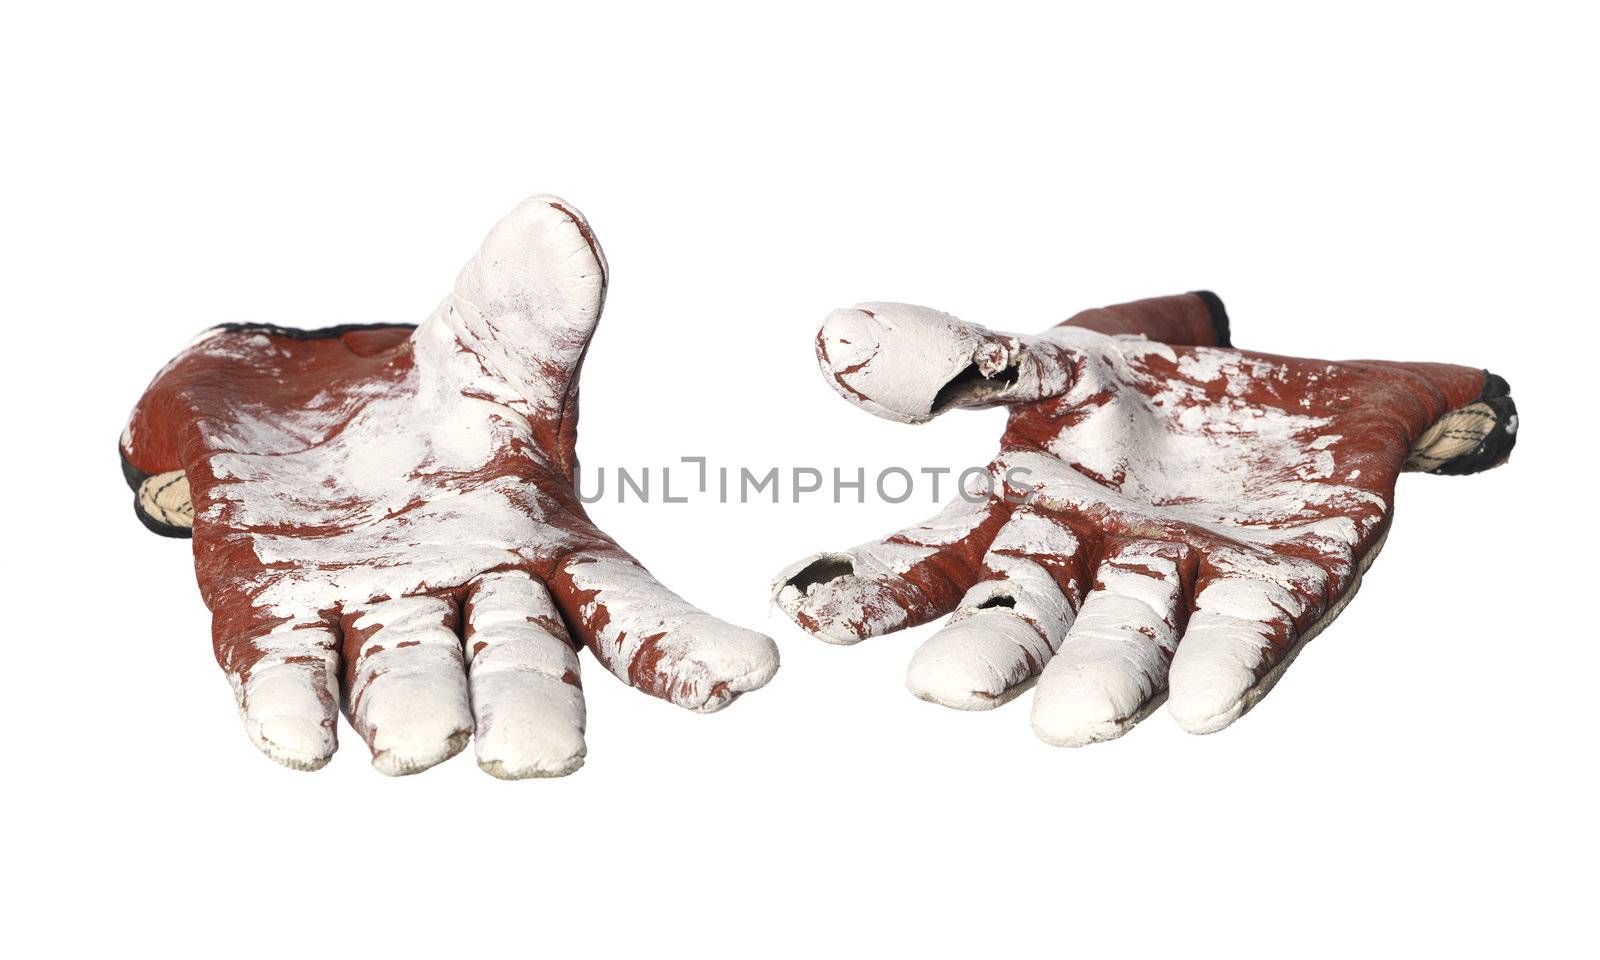 Pair of Protective gloves